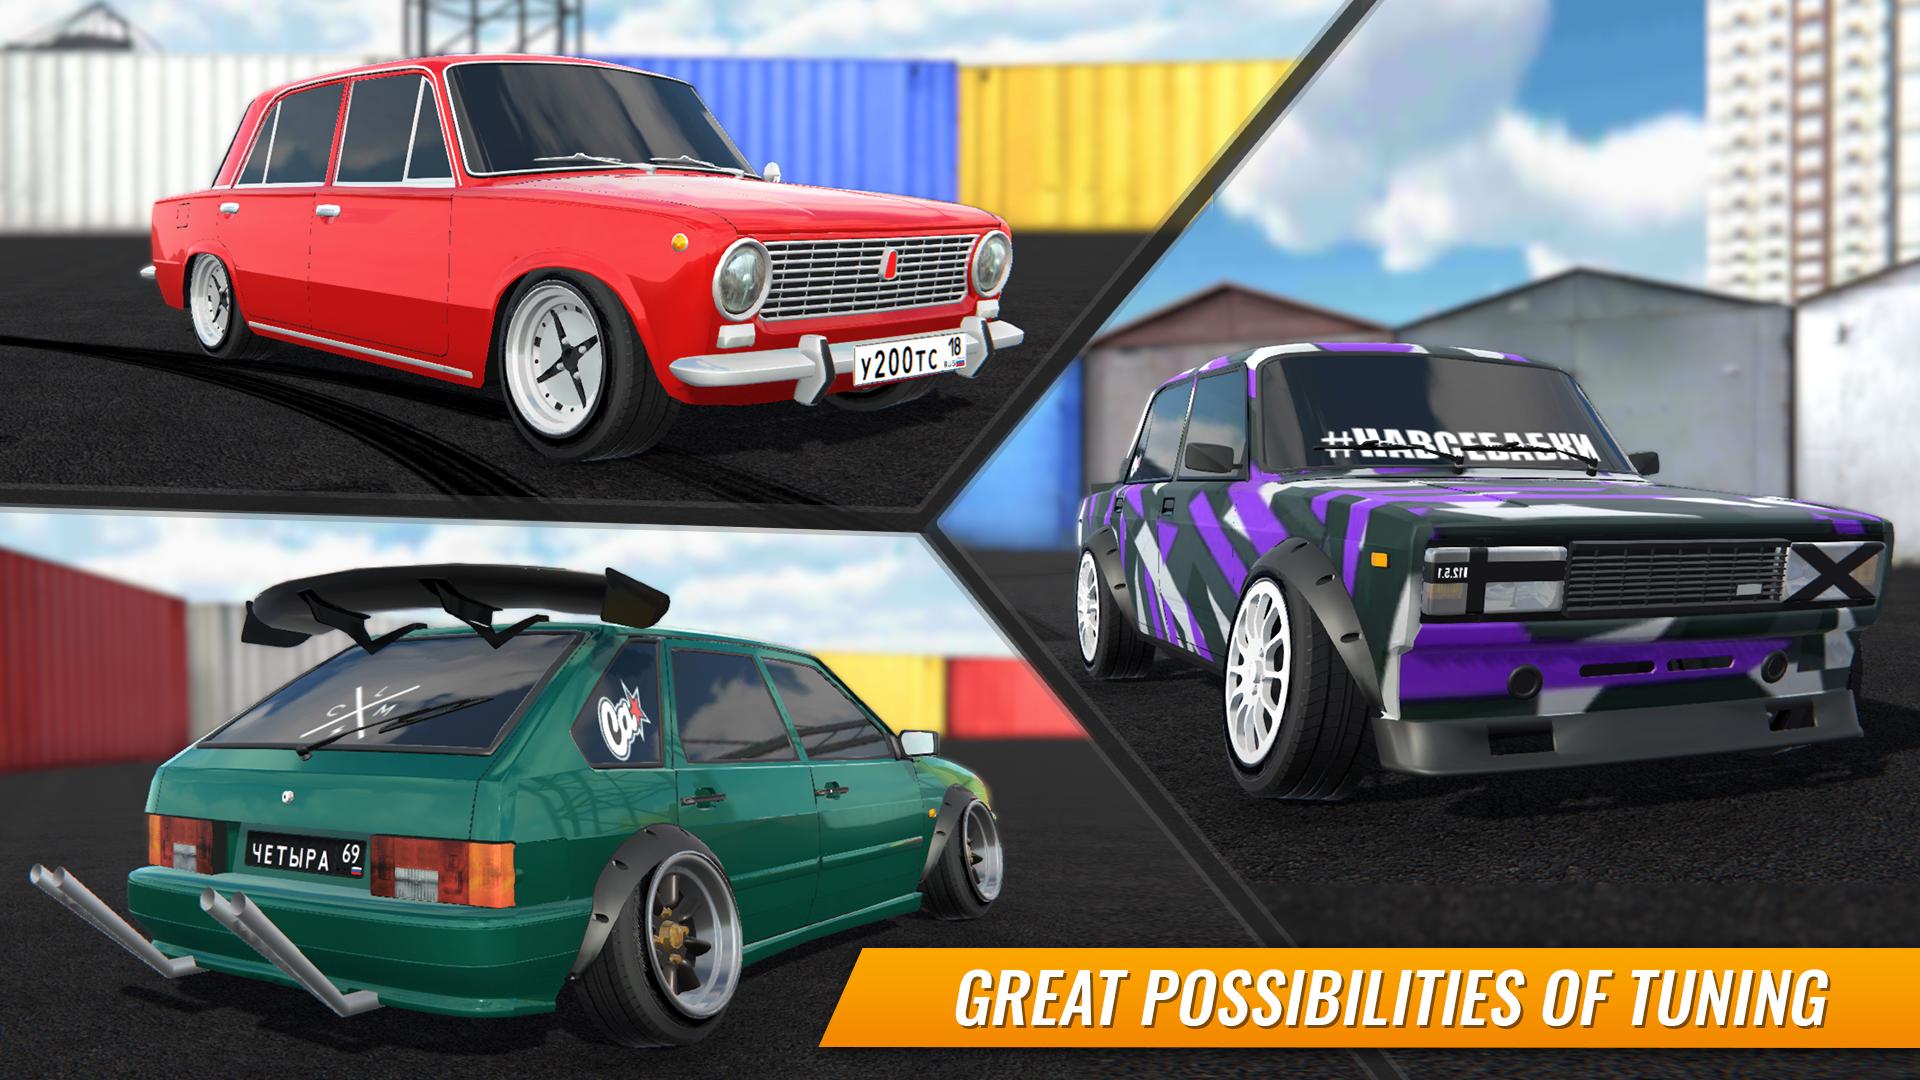 Russian Car Drift for Android - APK Download